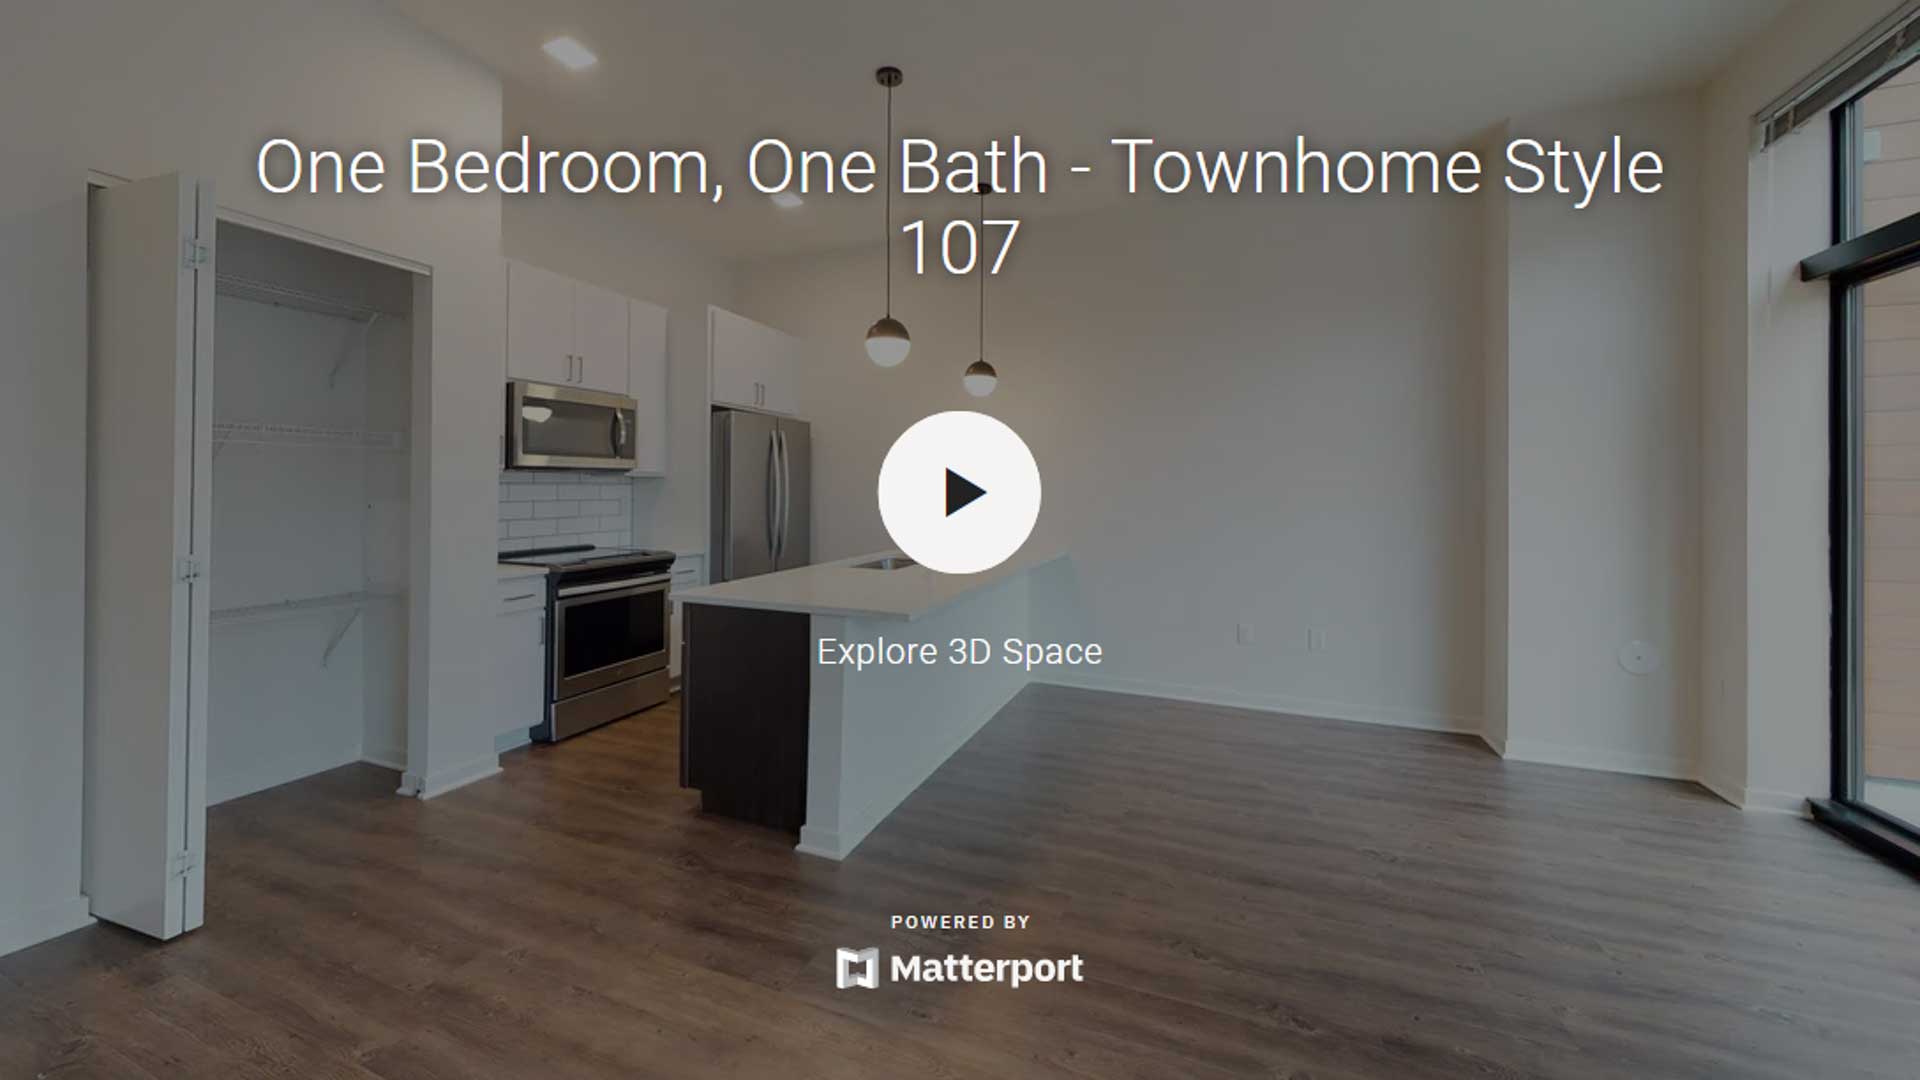 One Bedroom, One Bath - Townhome Style 107